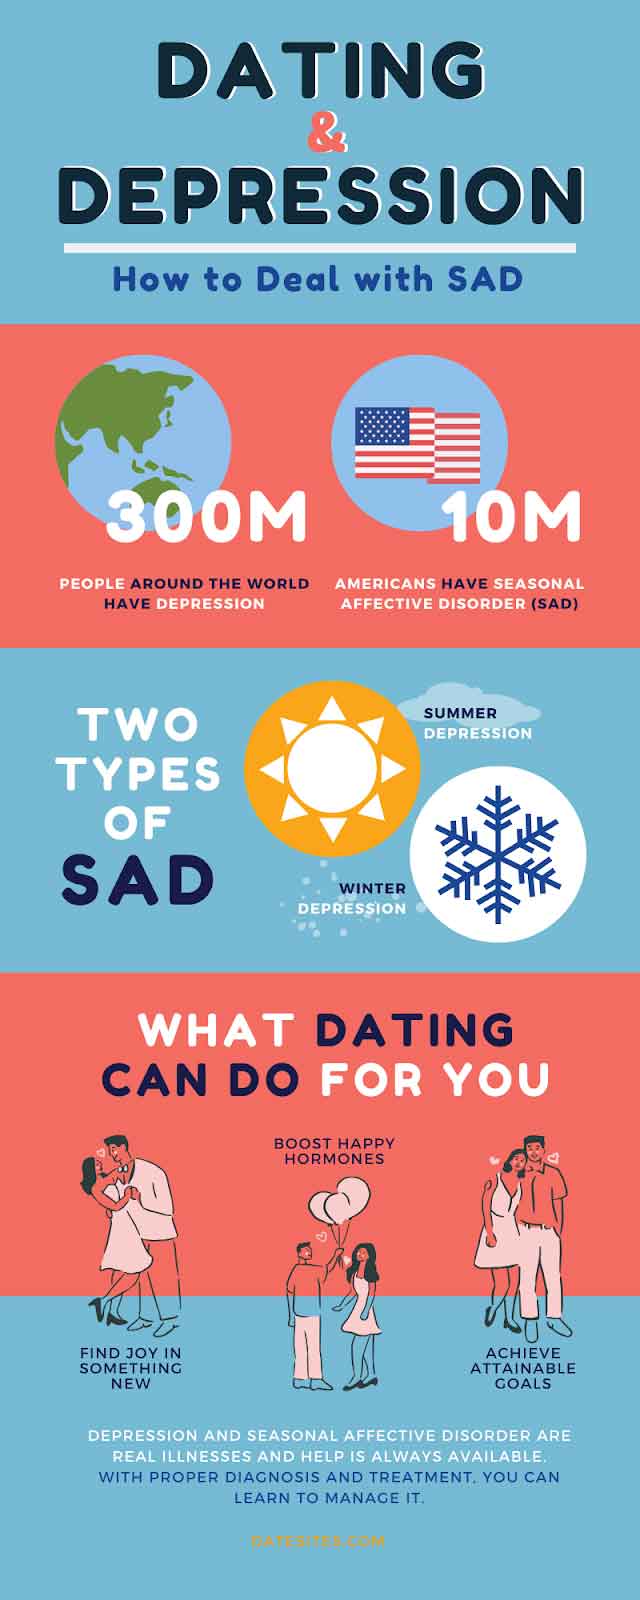  An infographic on the connection between depression and dating.